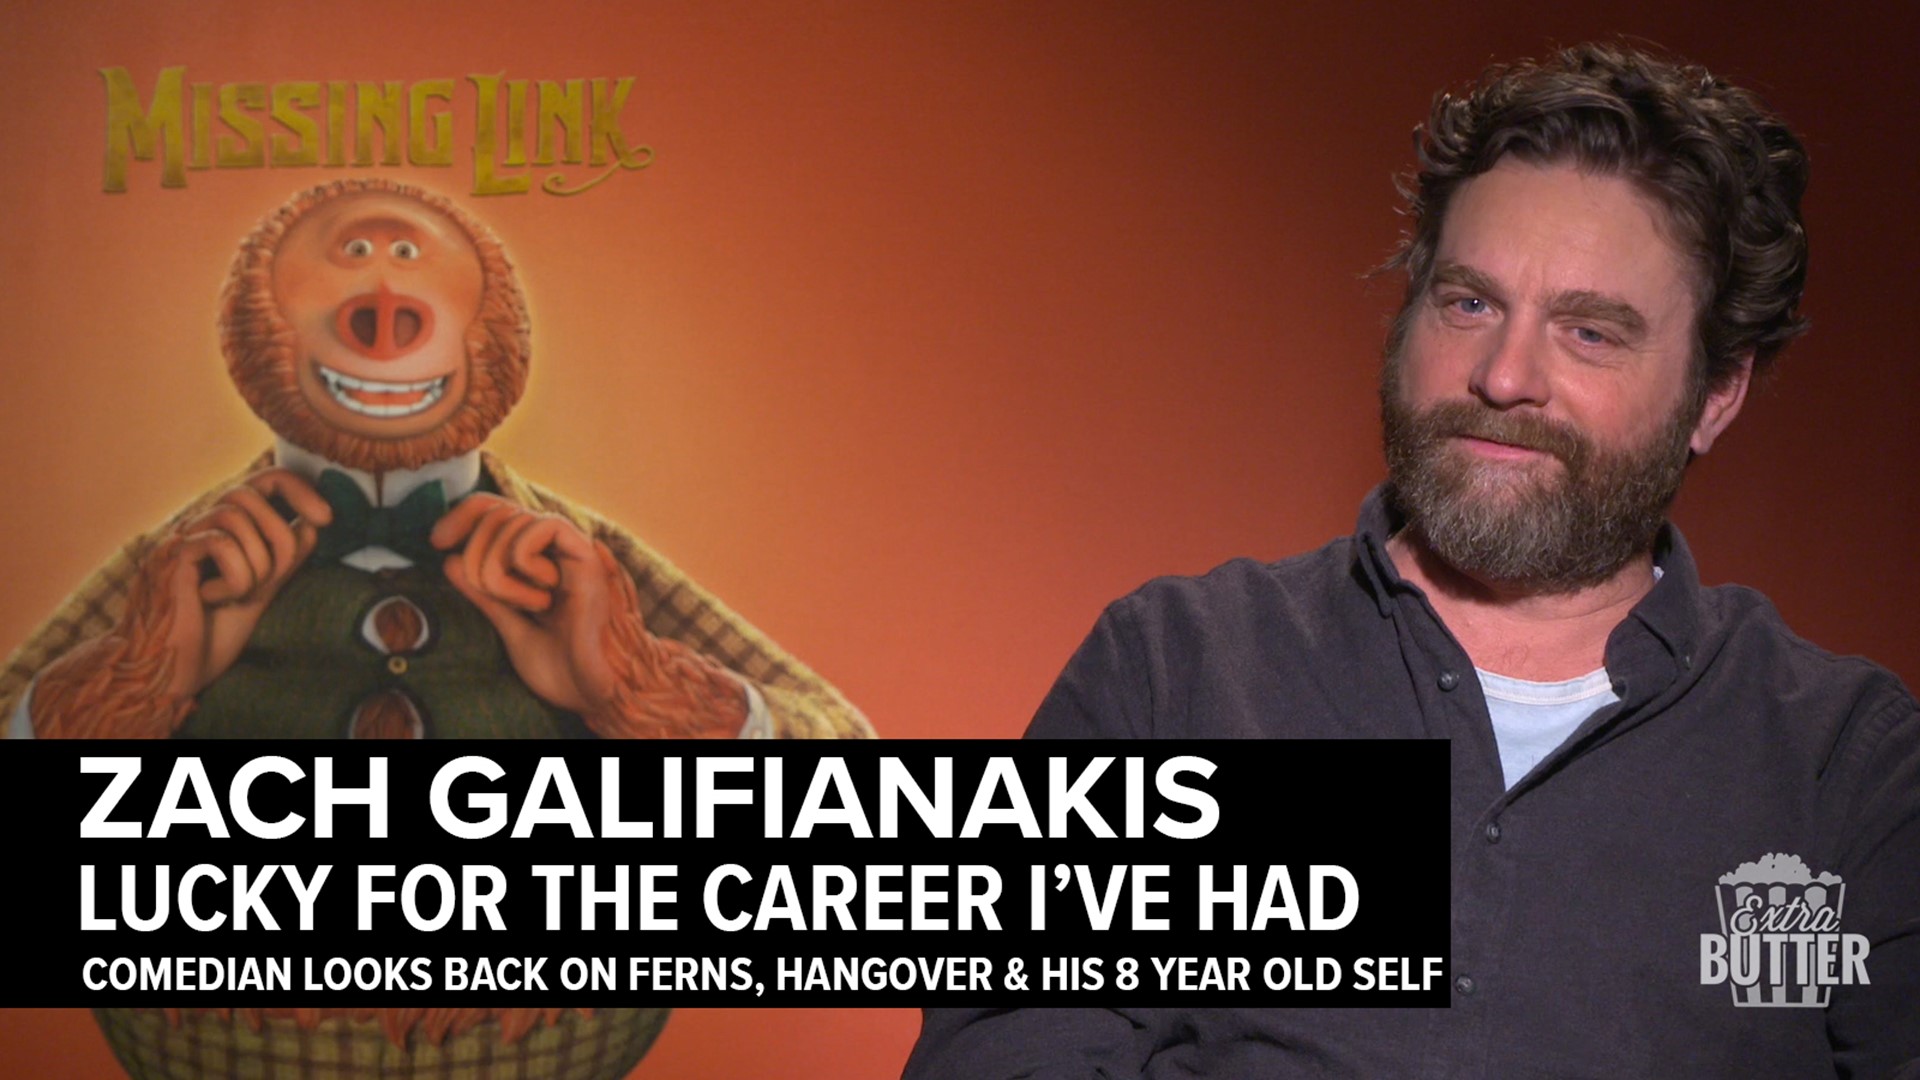 Comedian Zach Galifianakis opens up about how lucky he considers himself for all he has had the opportunity to do. Zach breaks down his three favorite 'Between Two Ferns' interviews (even if he doesn't have anything in common with 'Hangover' co-star Bradley Cooper). He also tells Mark S. Allen what advice his older self would have for him as a kid. Interview arranged by United Artists Releasing. Footage from Funny or Die.